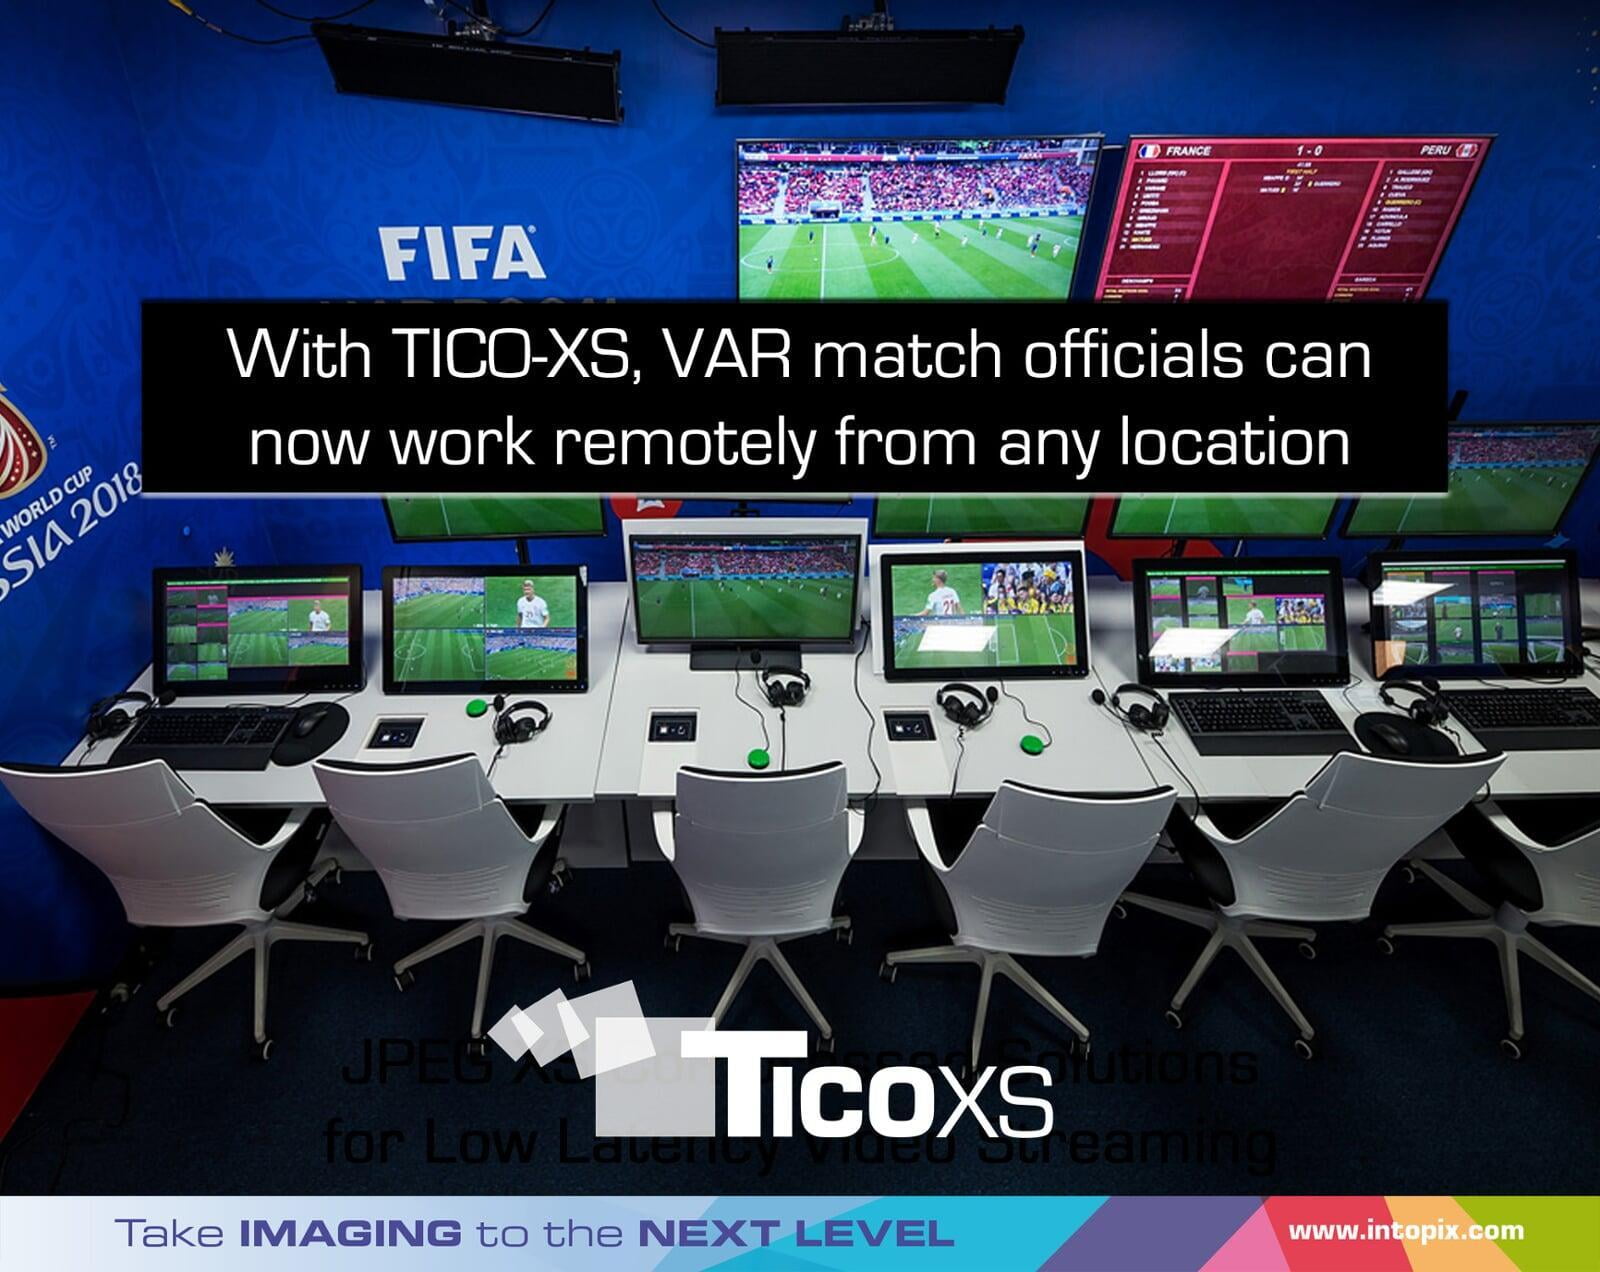 JPEG XS to help the deployment of remote video review solutions for Video Assistant Referees (VAR)